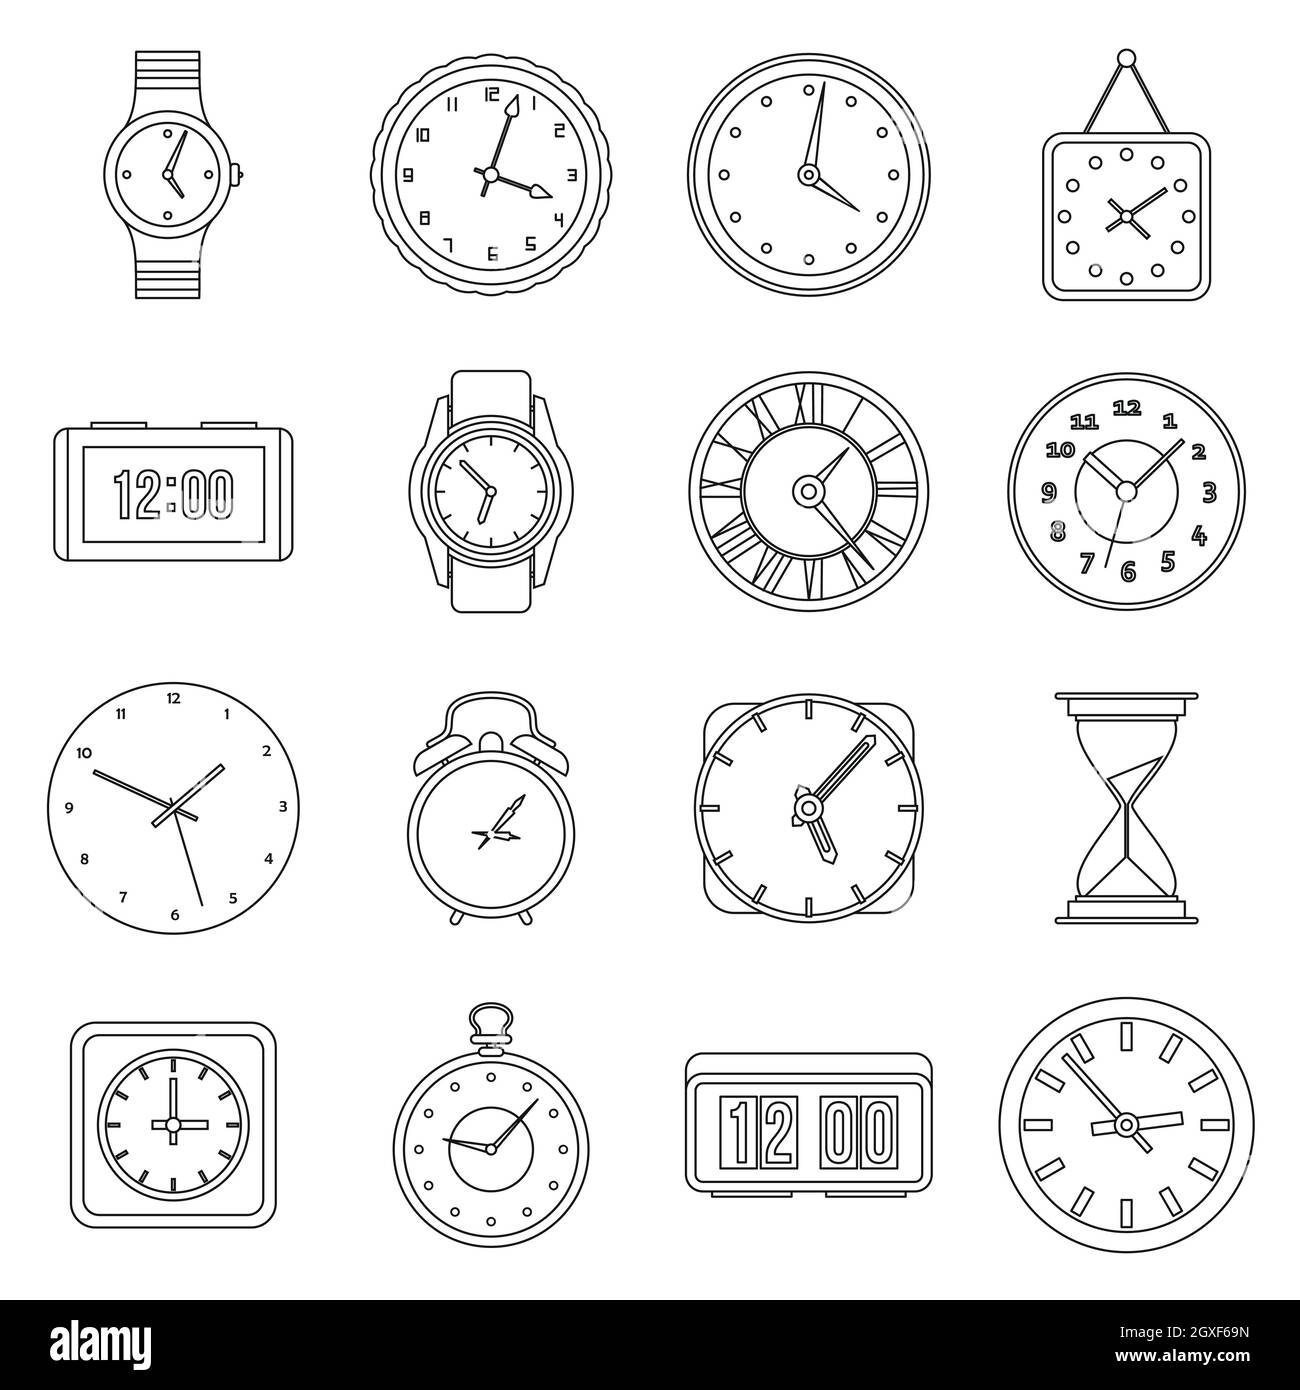 Time and Clock icons set in outline style for any design Stock Photo